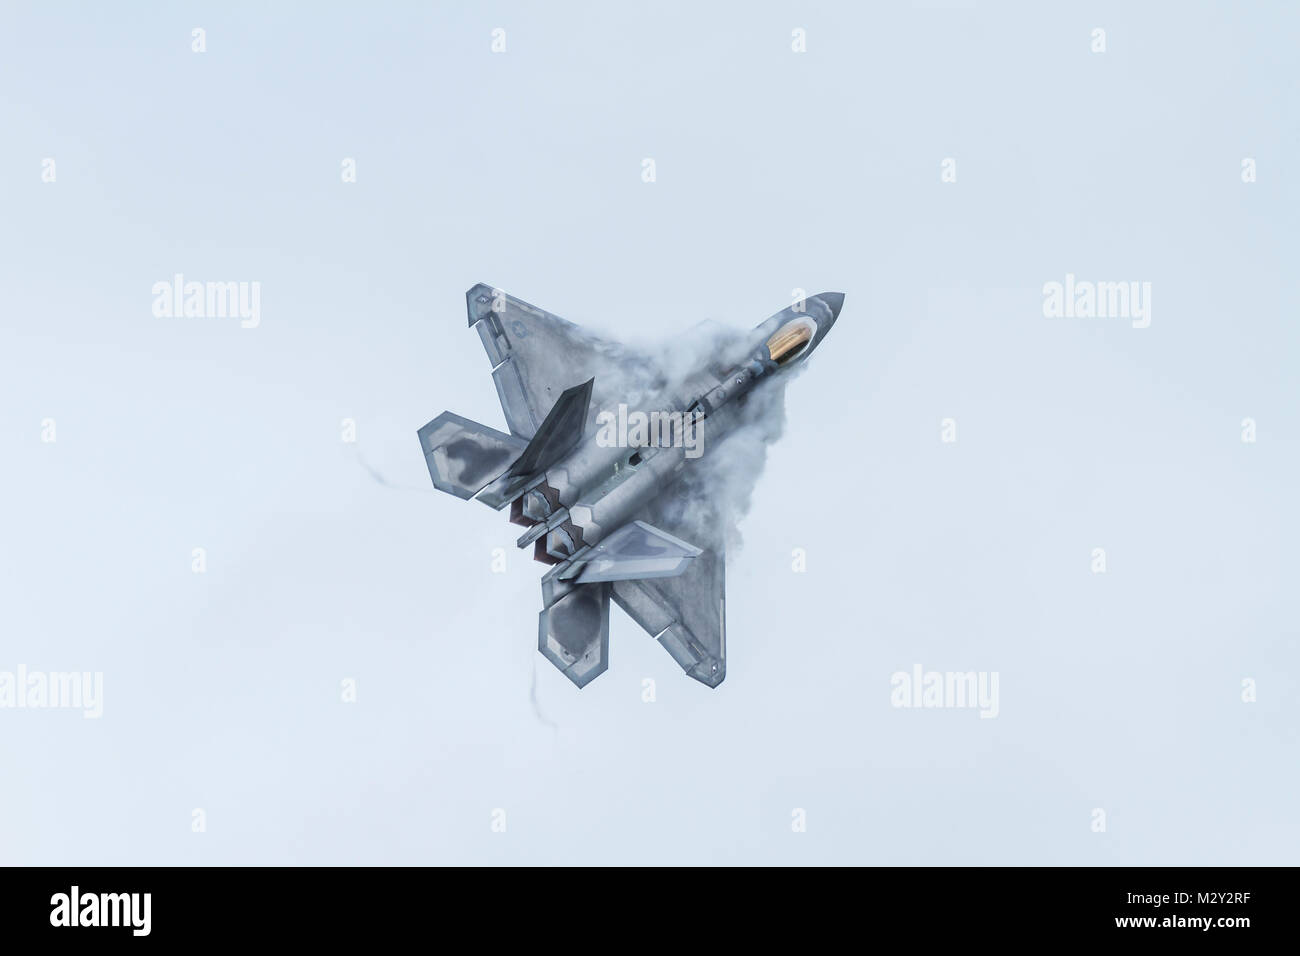 A Lockheed Martin F-22 Raptor from the United States Air Force in a climbing turn with vortices on July 9th 2016 at Duxford, Cambridgeshire, UK Stock Photo